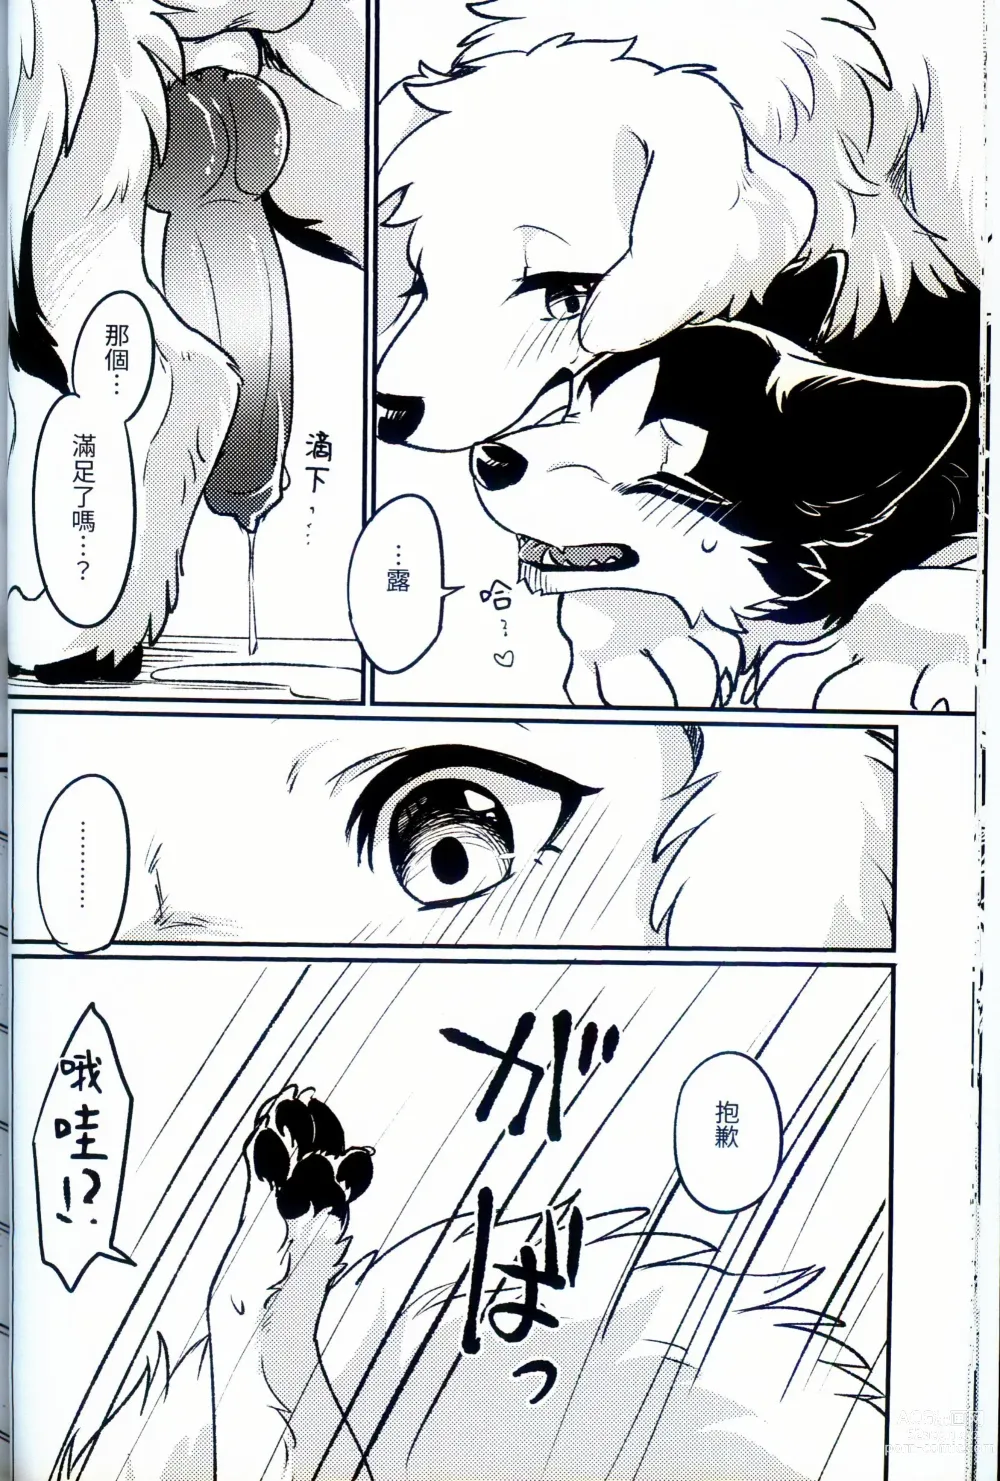 Page 15 of doujinshi More,more,MORE! (decensored)